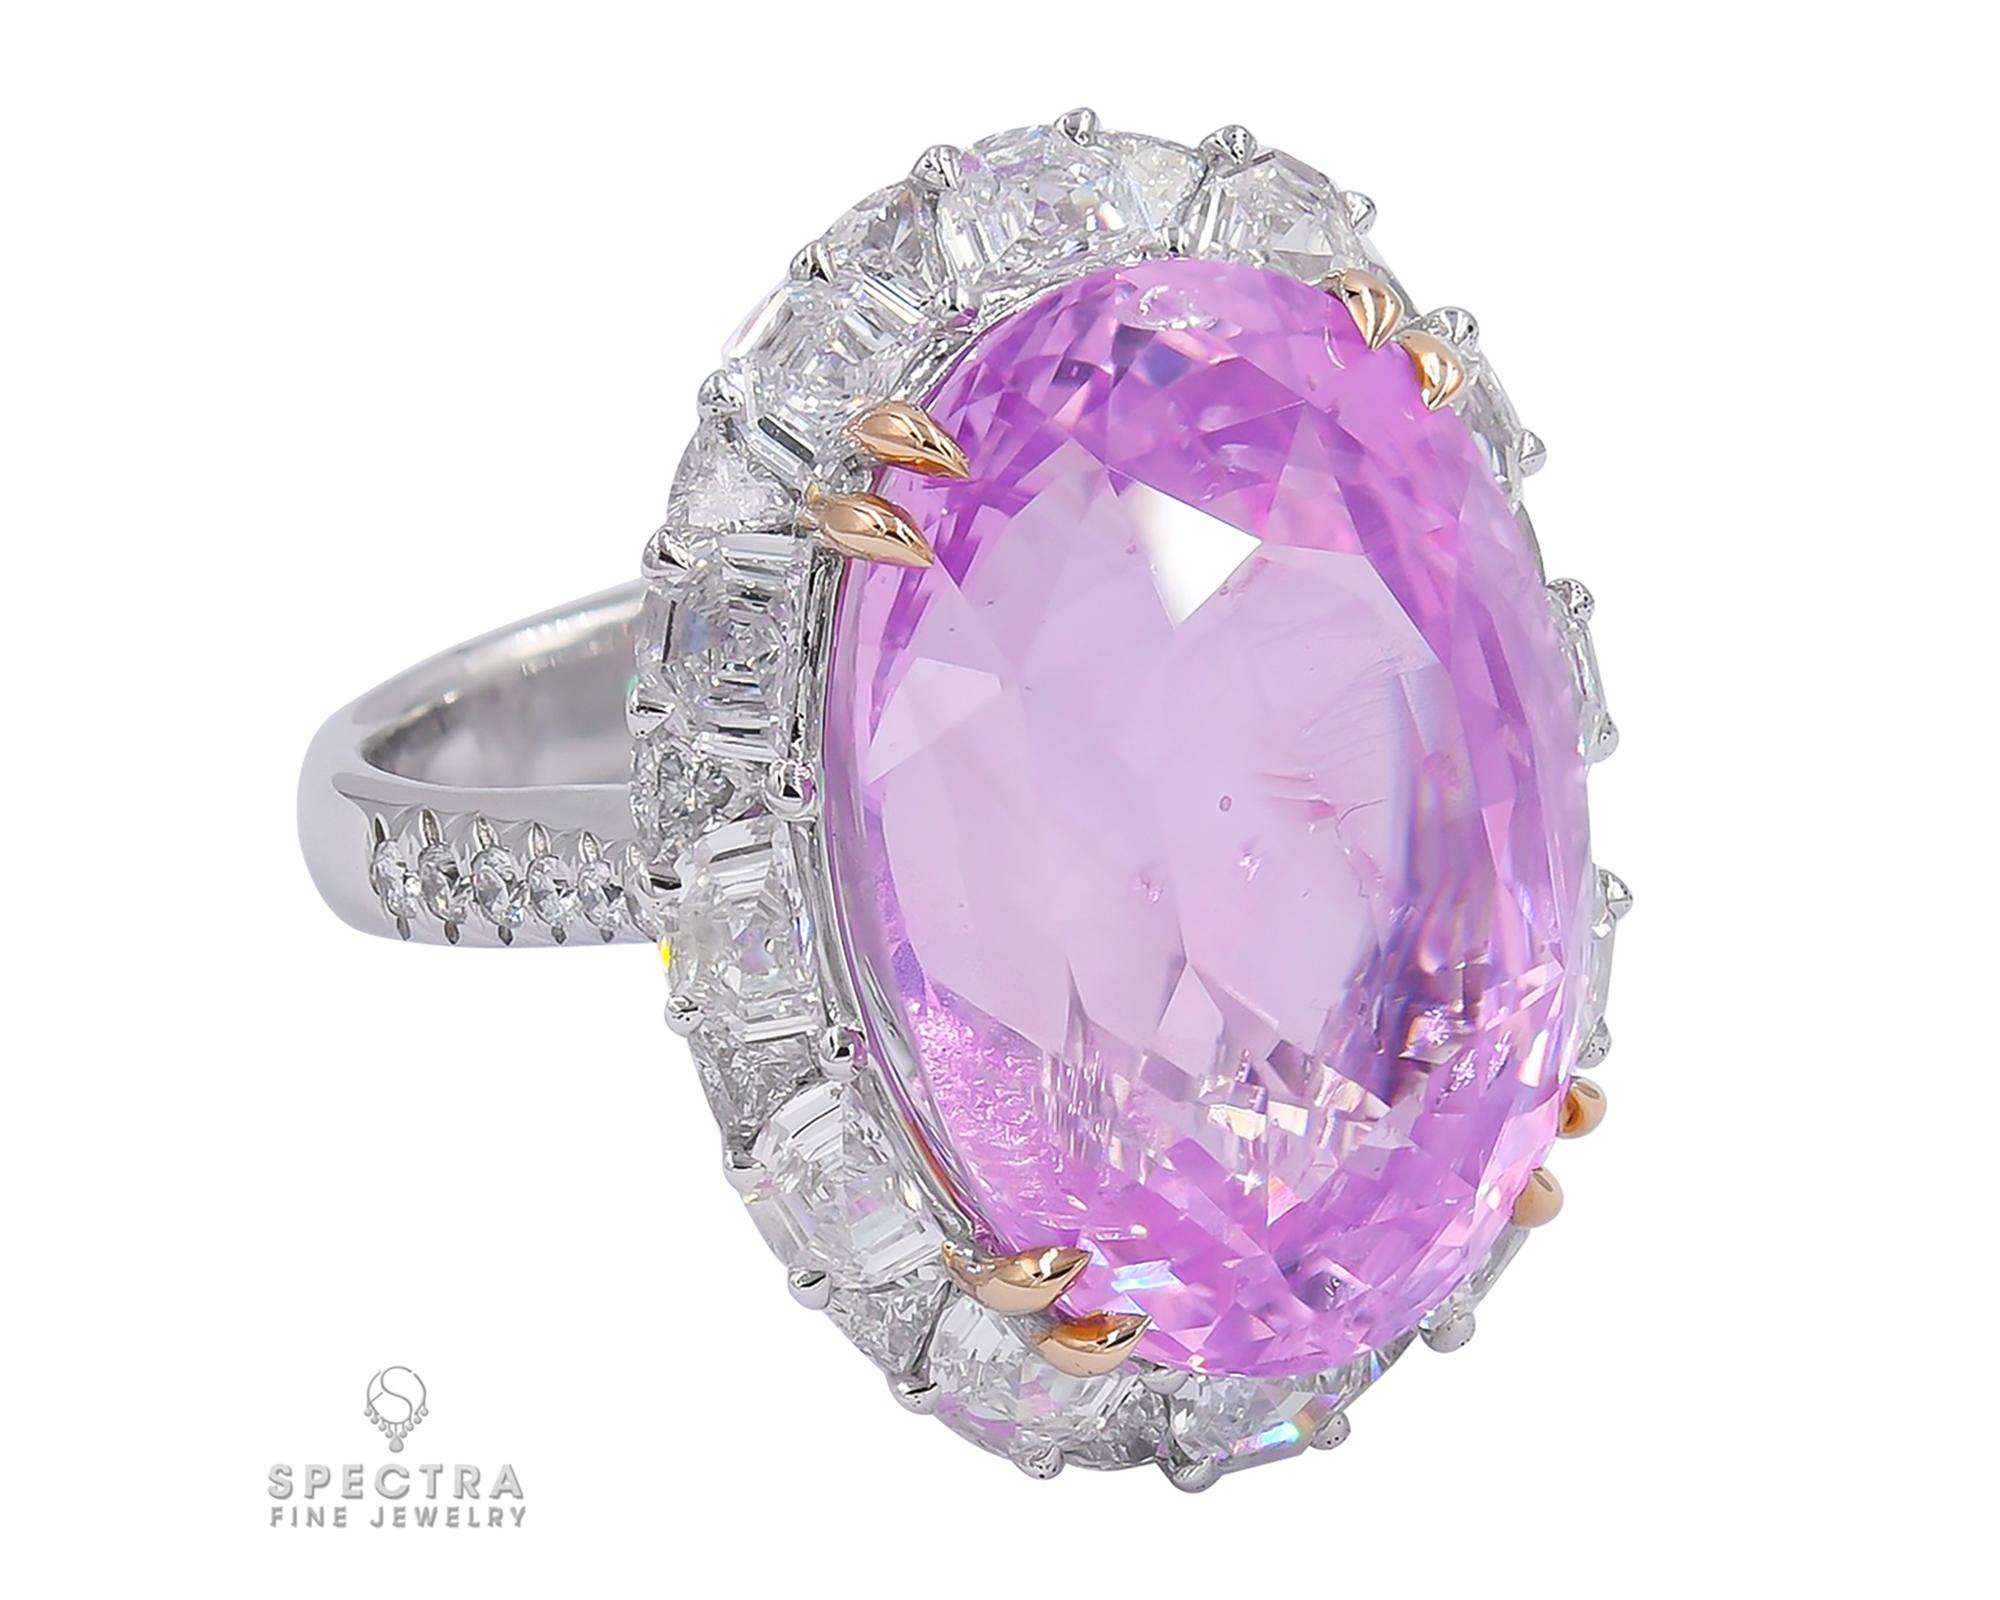 Pink is one of the rarest sapphire colors, caused by trace elements of chromium inside the corundum crystal, the same which colors a ruby. This Contemporary Pink Sapphire Halo Ring, made in the 21st century, would be stunning as a cocktail ring or